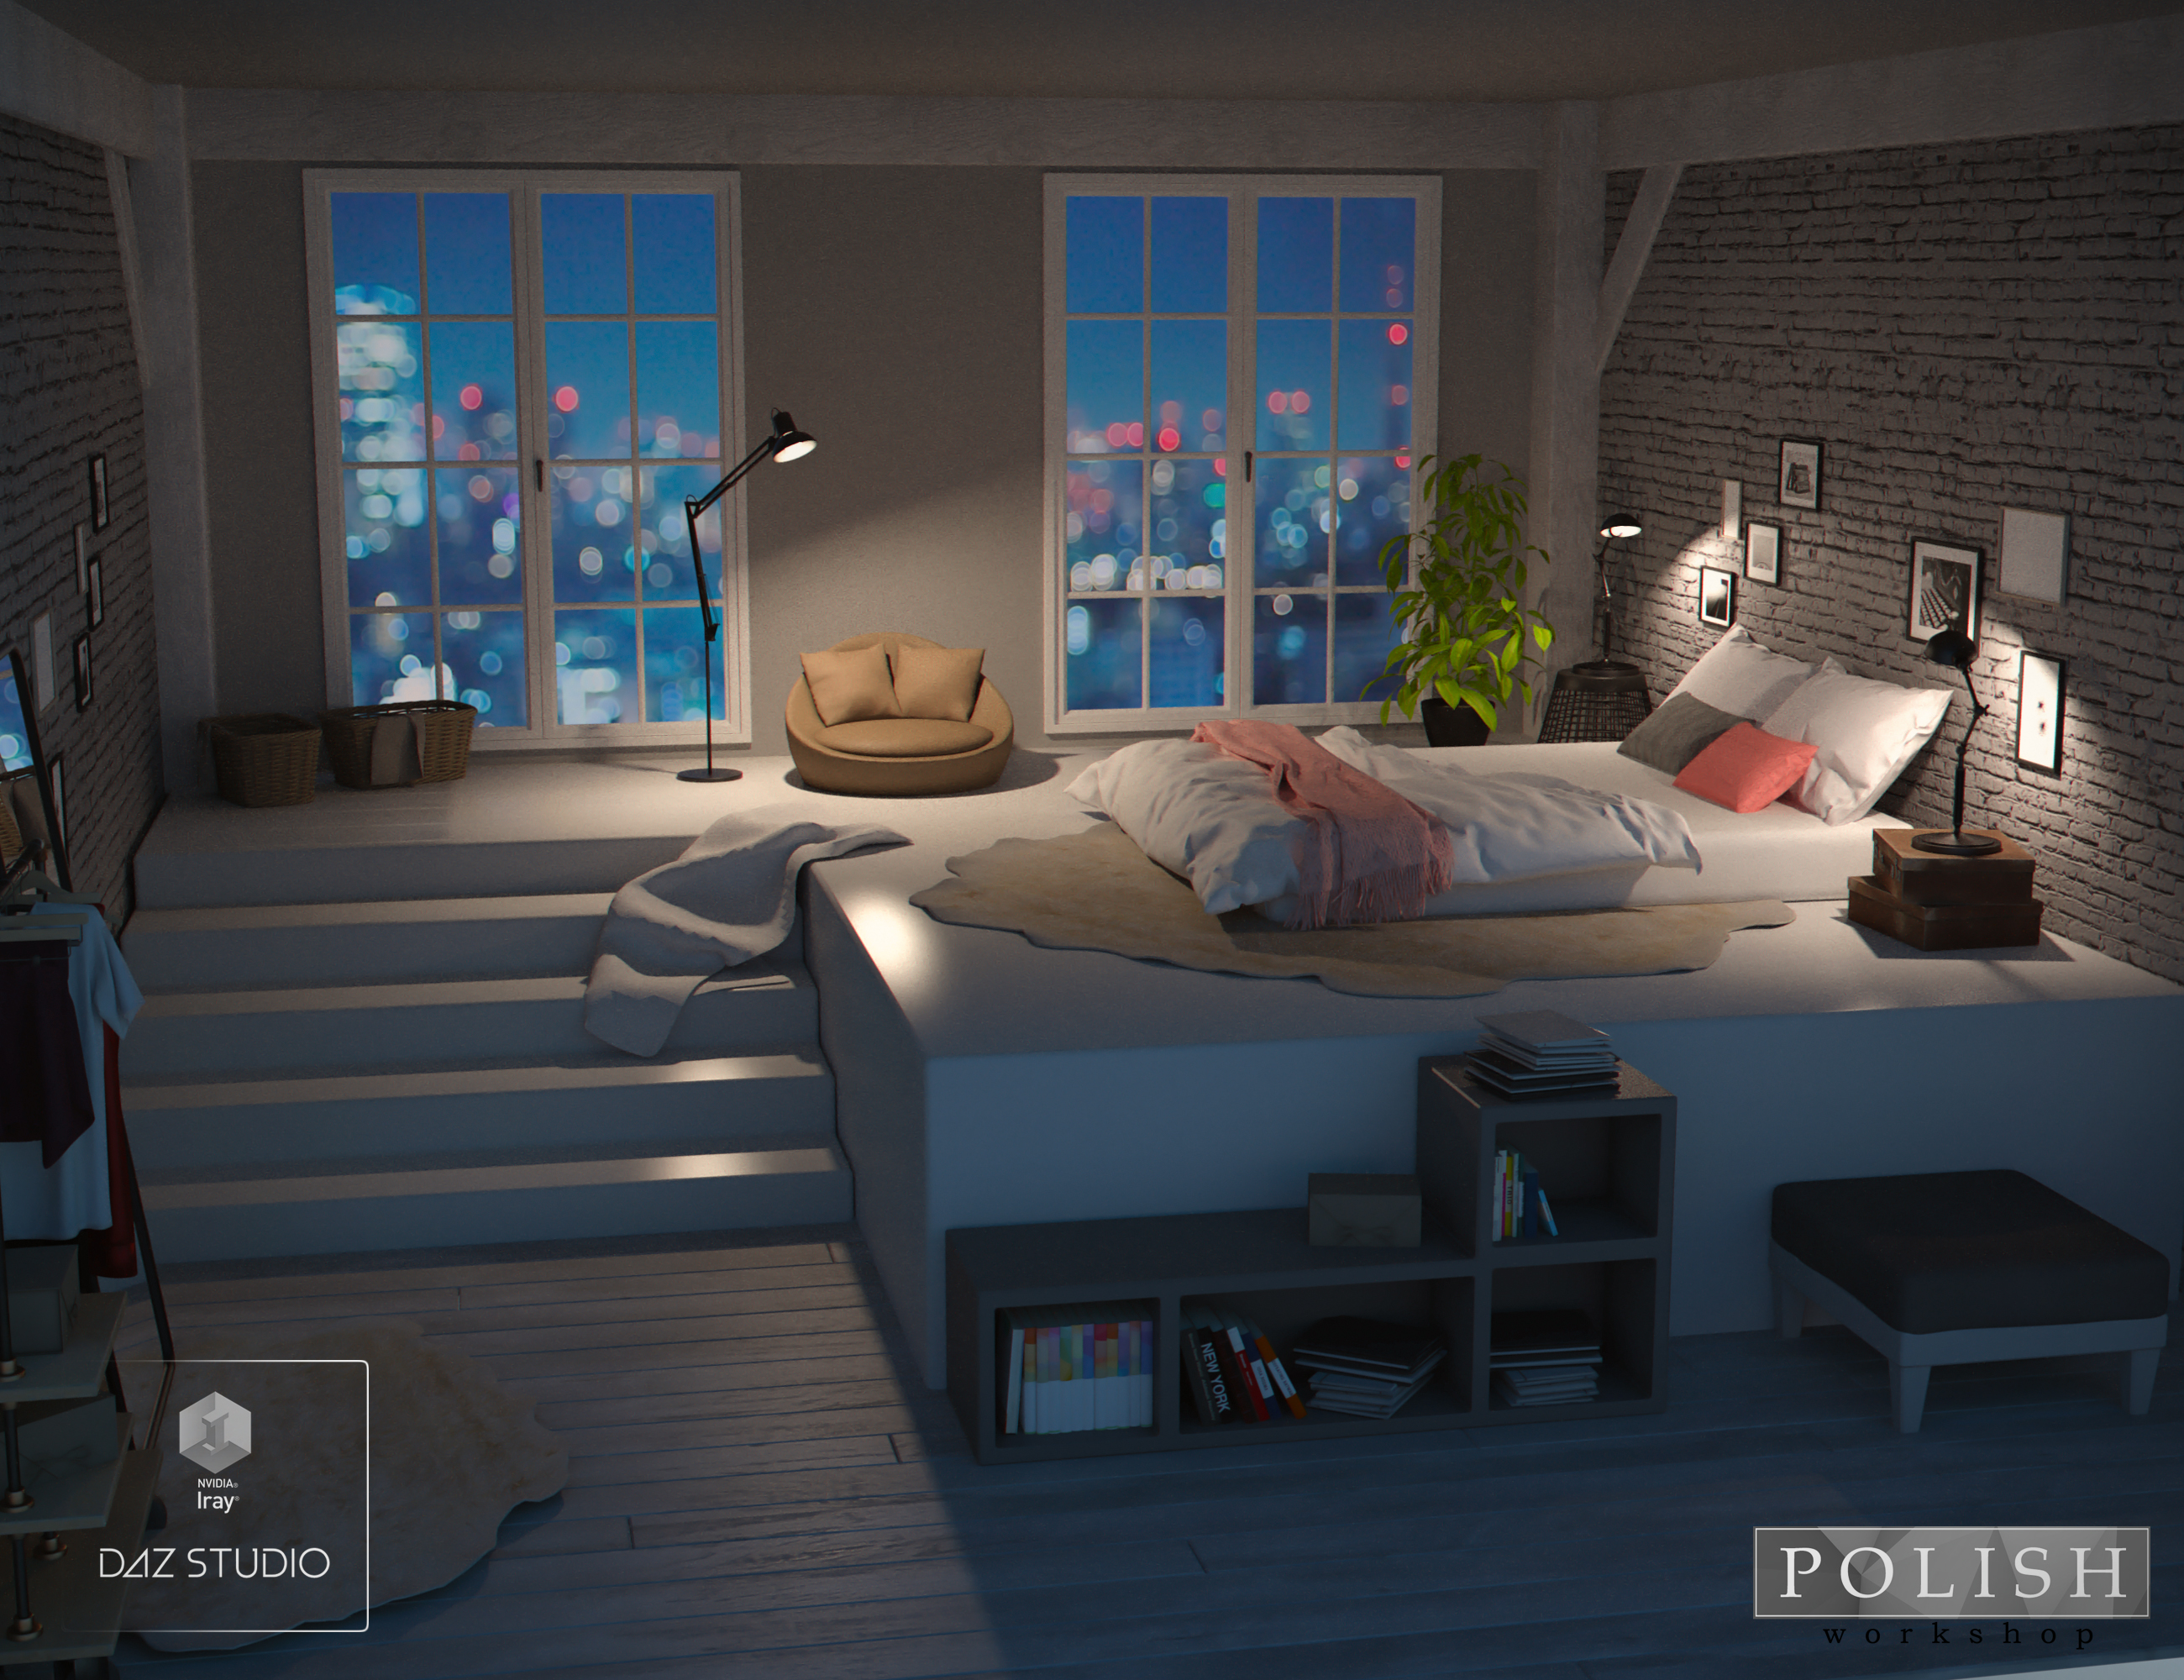 Cozy Bedroom by: Polish, 3D Models by Daz 3D